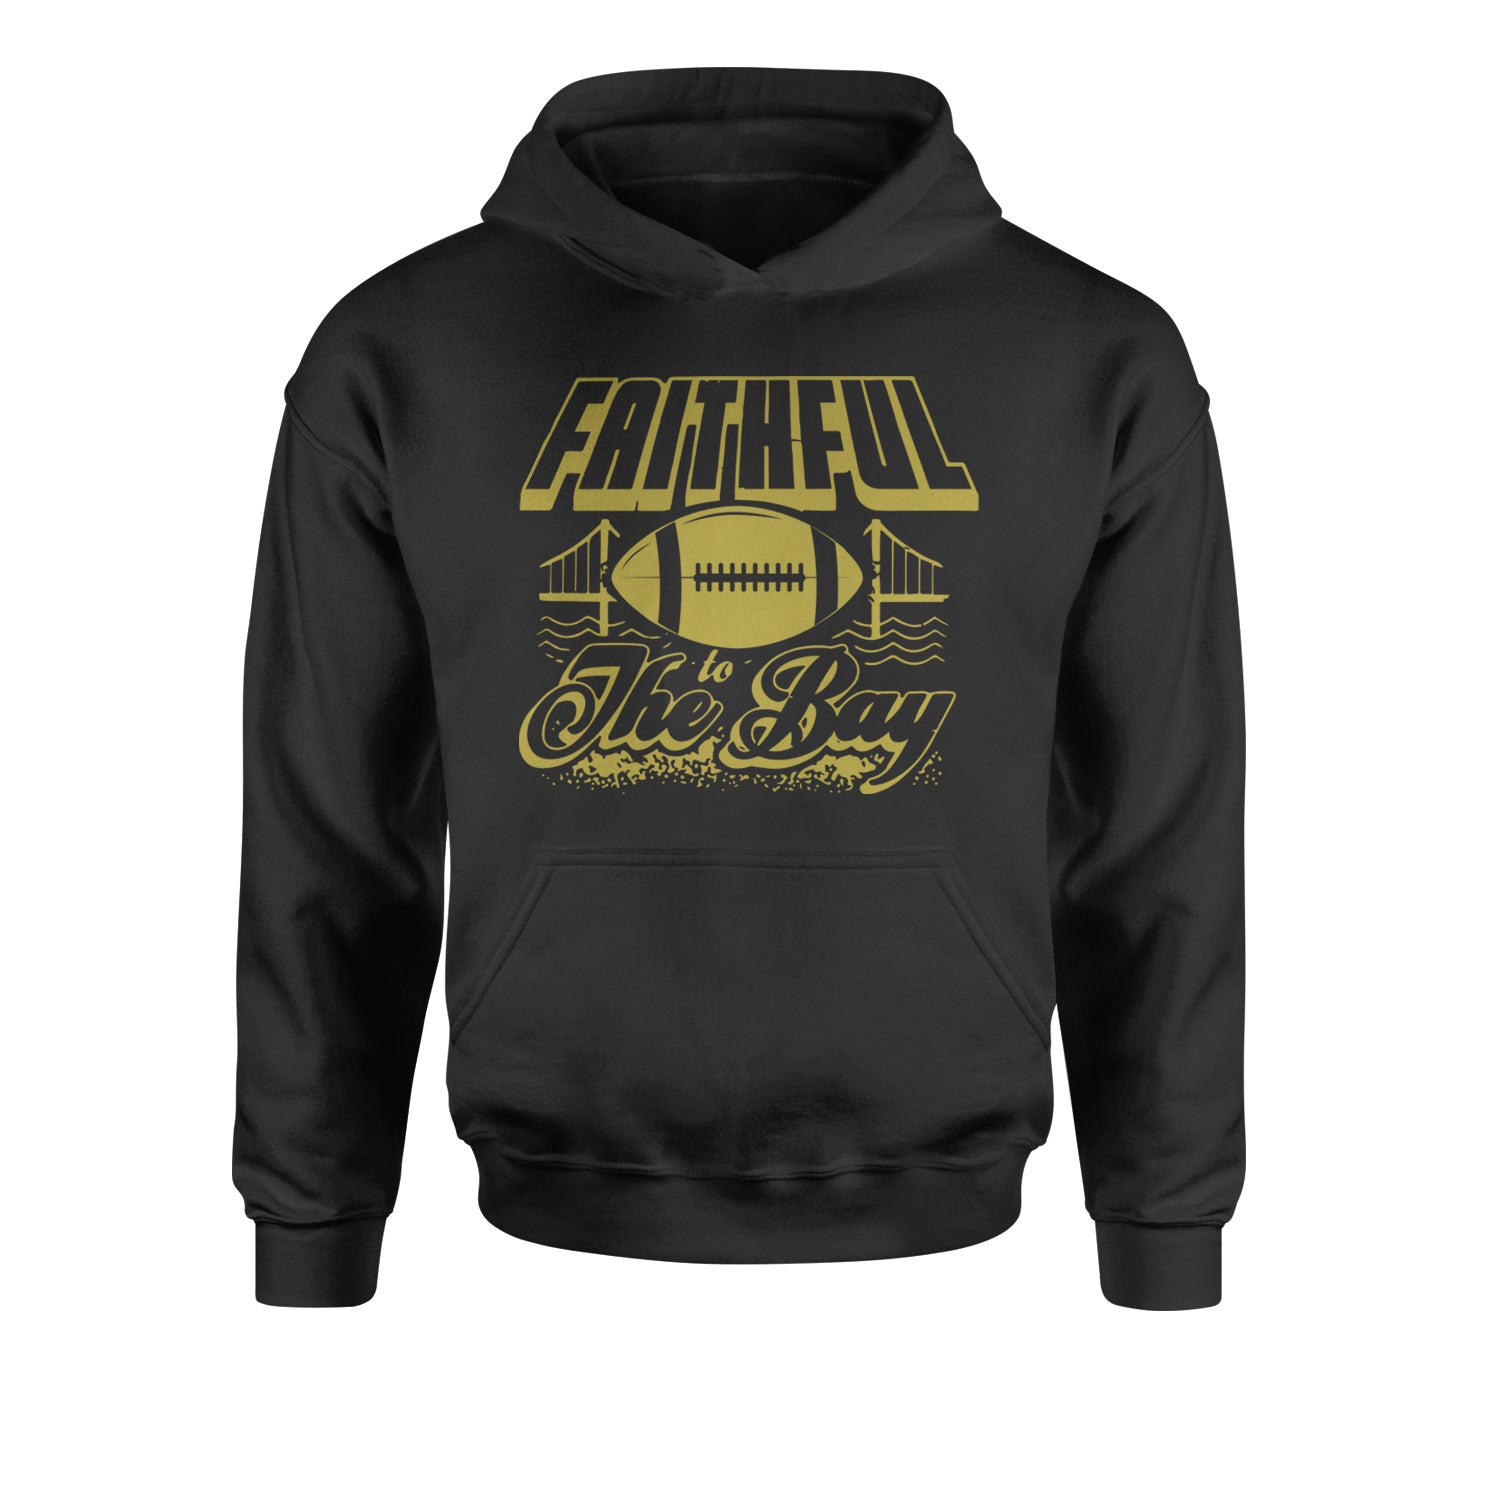 Faithful To The San Francisco Bay Youth-Sized Hoodie